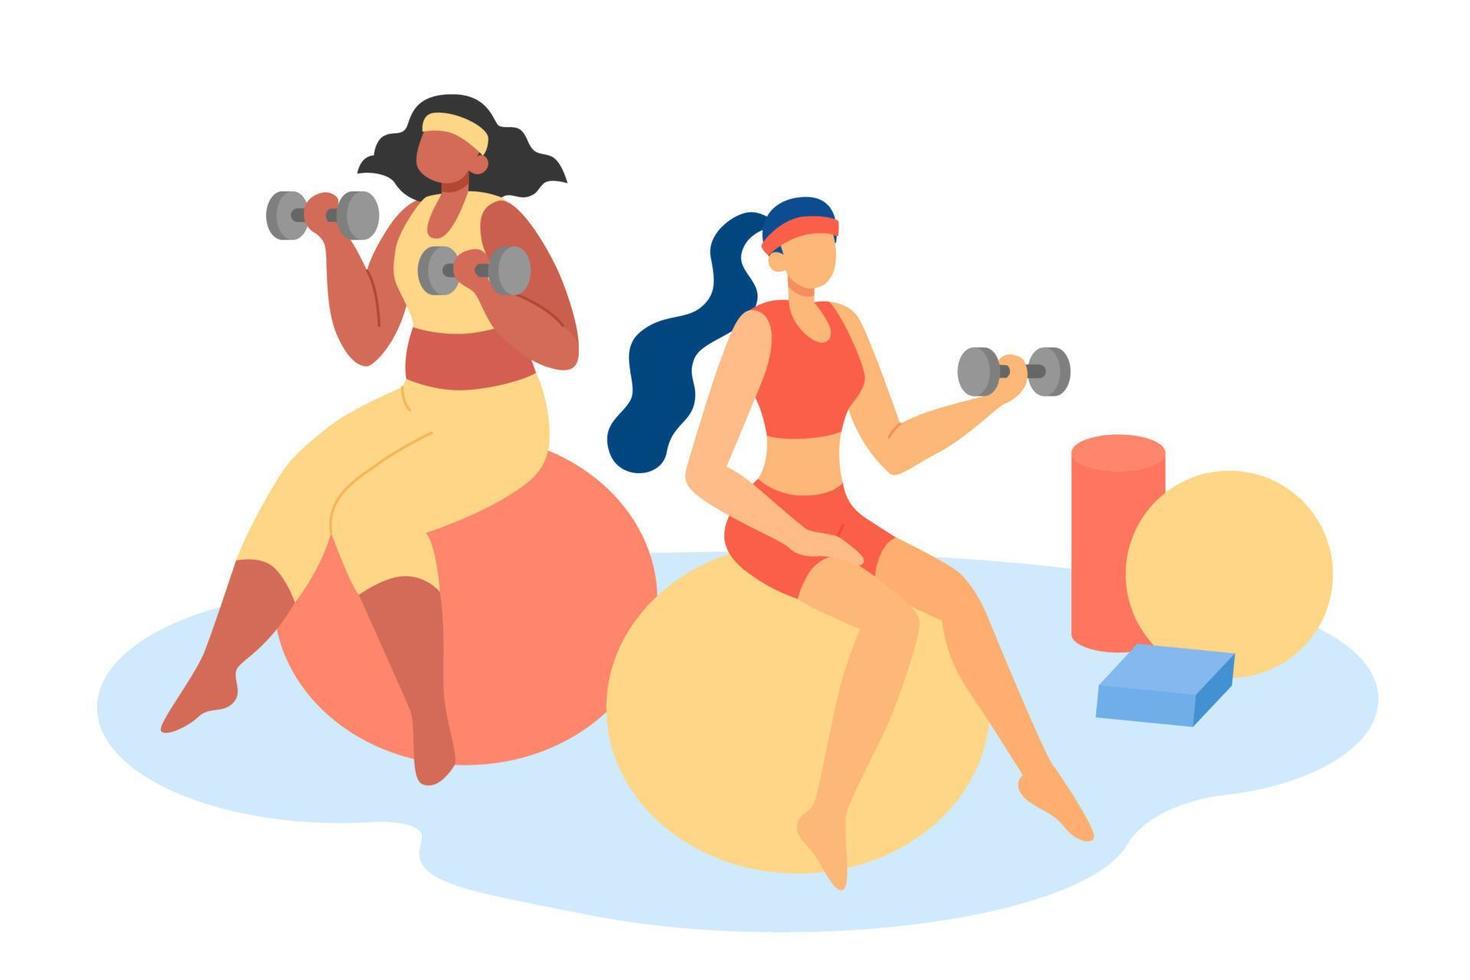 Multiracial female sitting on fitness balls and doing exercise using hand weights. Flat style illustration of women doing weight lifting vector